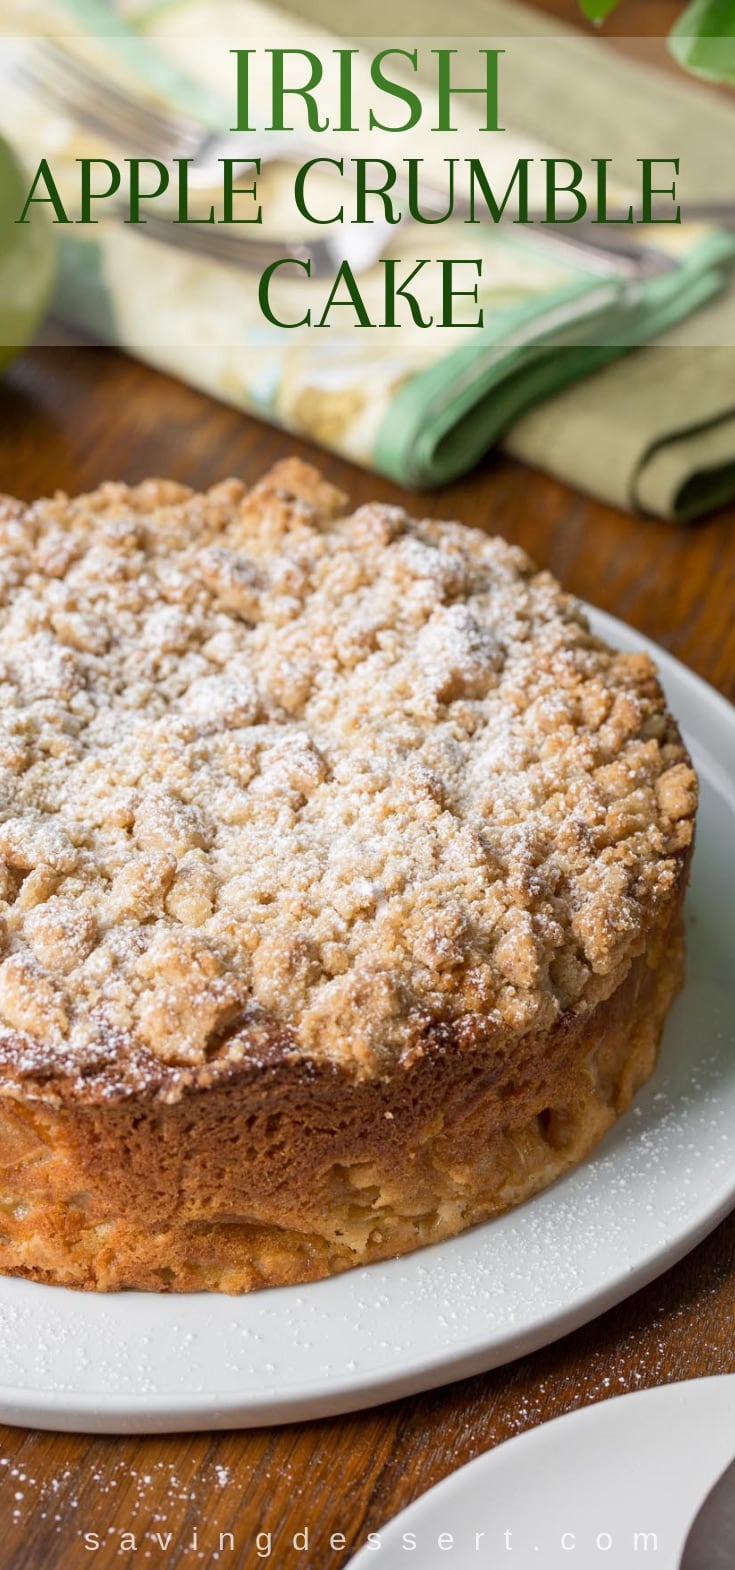 An Irish Apple Crumble Cake dusted with powdered sugar